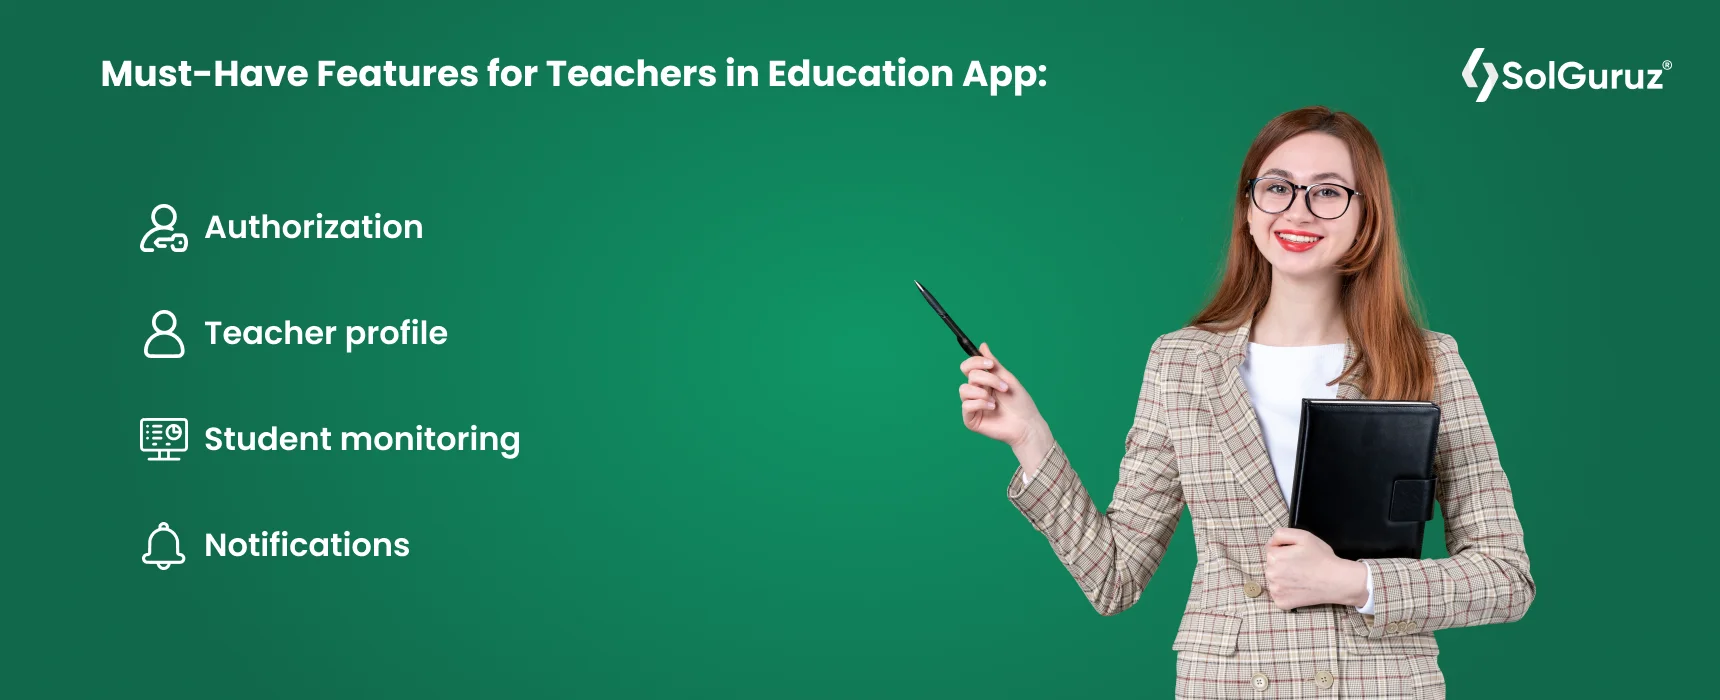 Must Have Features for Teachers in Education App